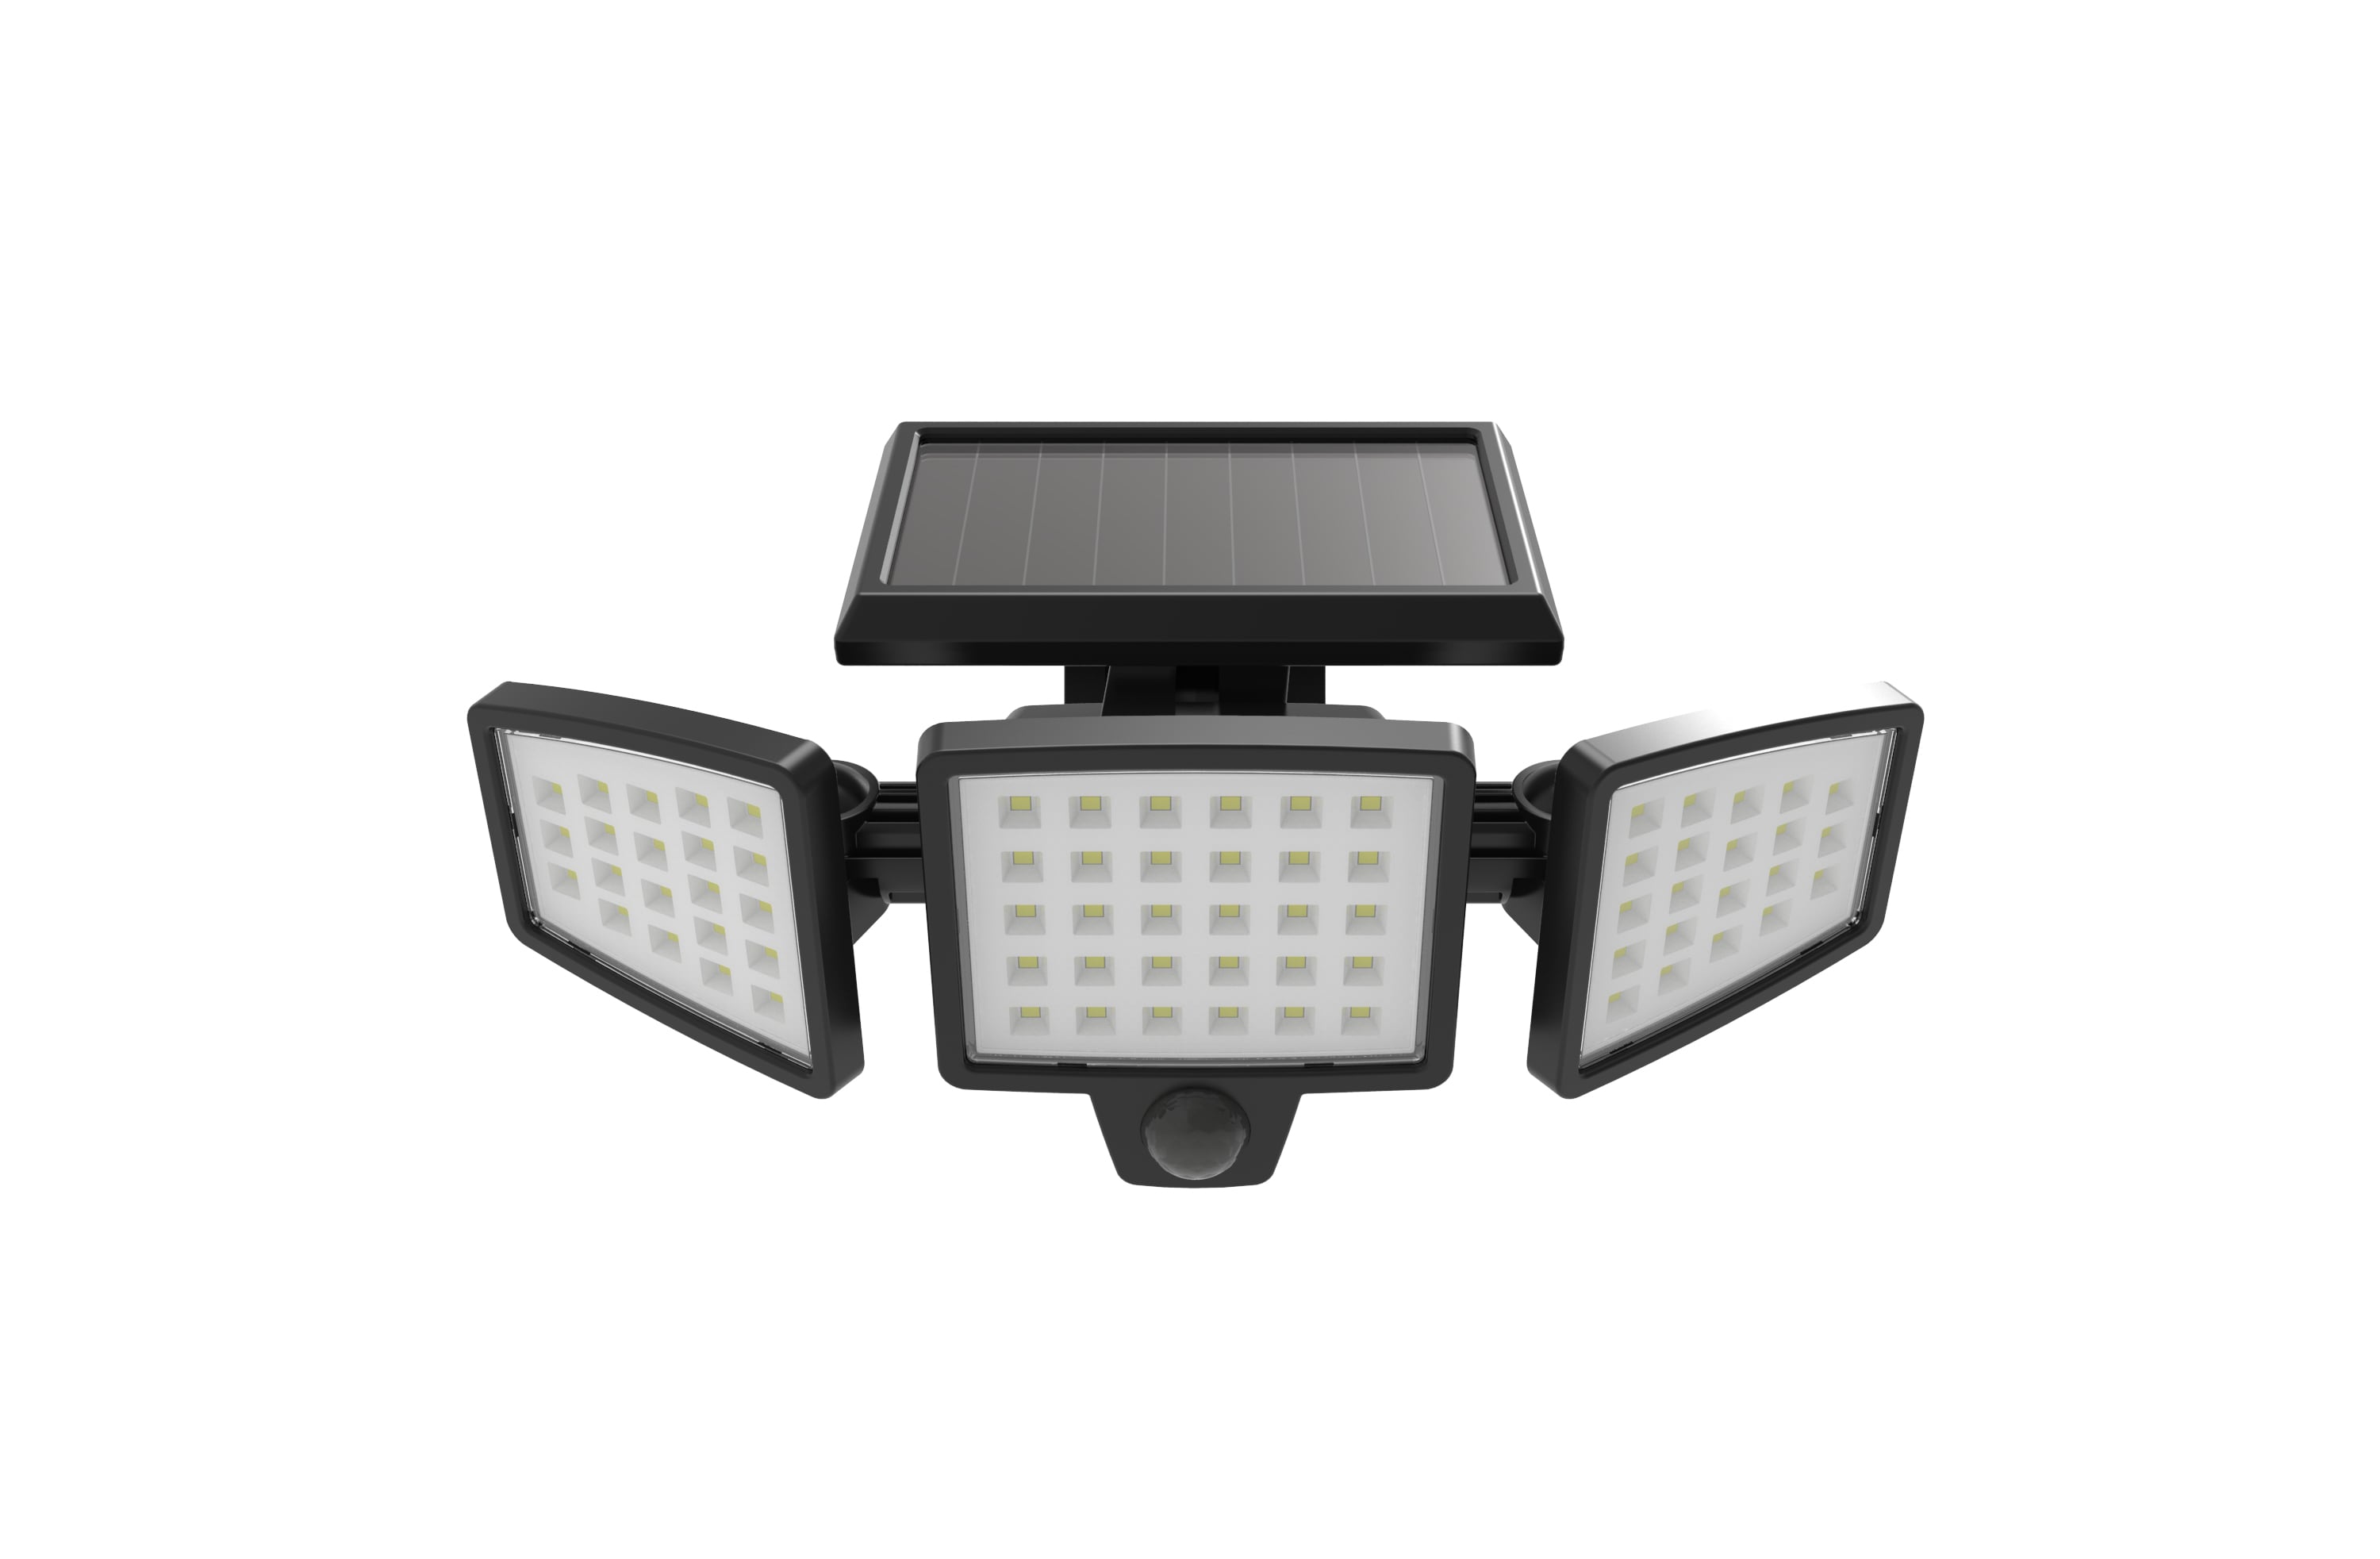 Amtech 12 LED Solar Powered Security Light With PIR Movement Detector 